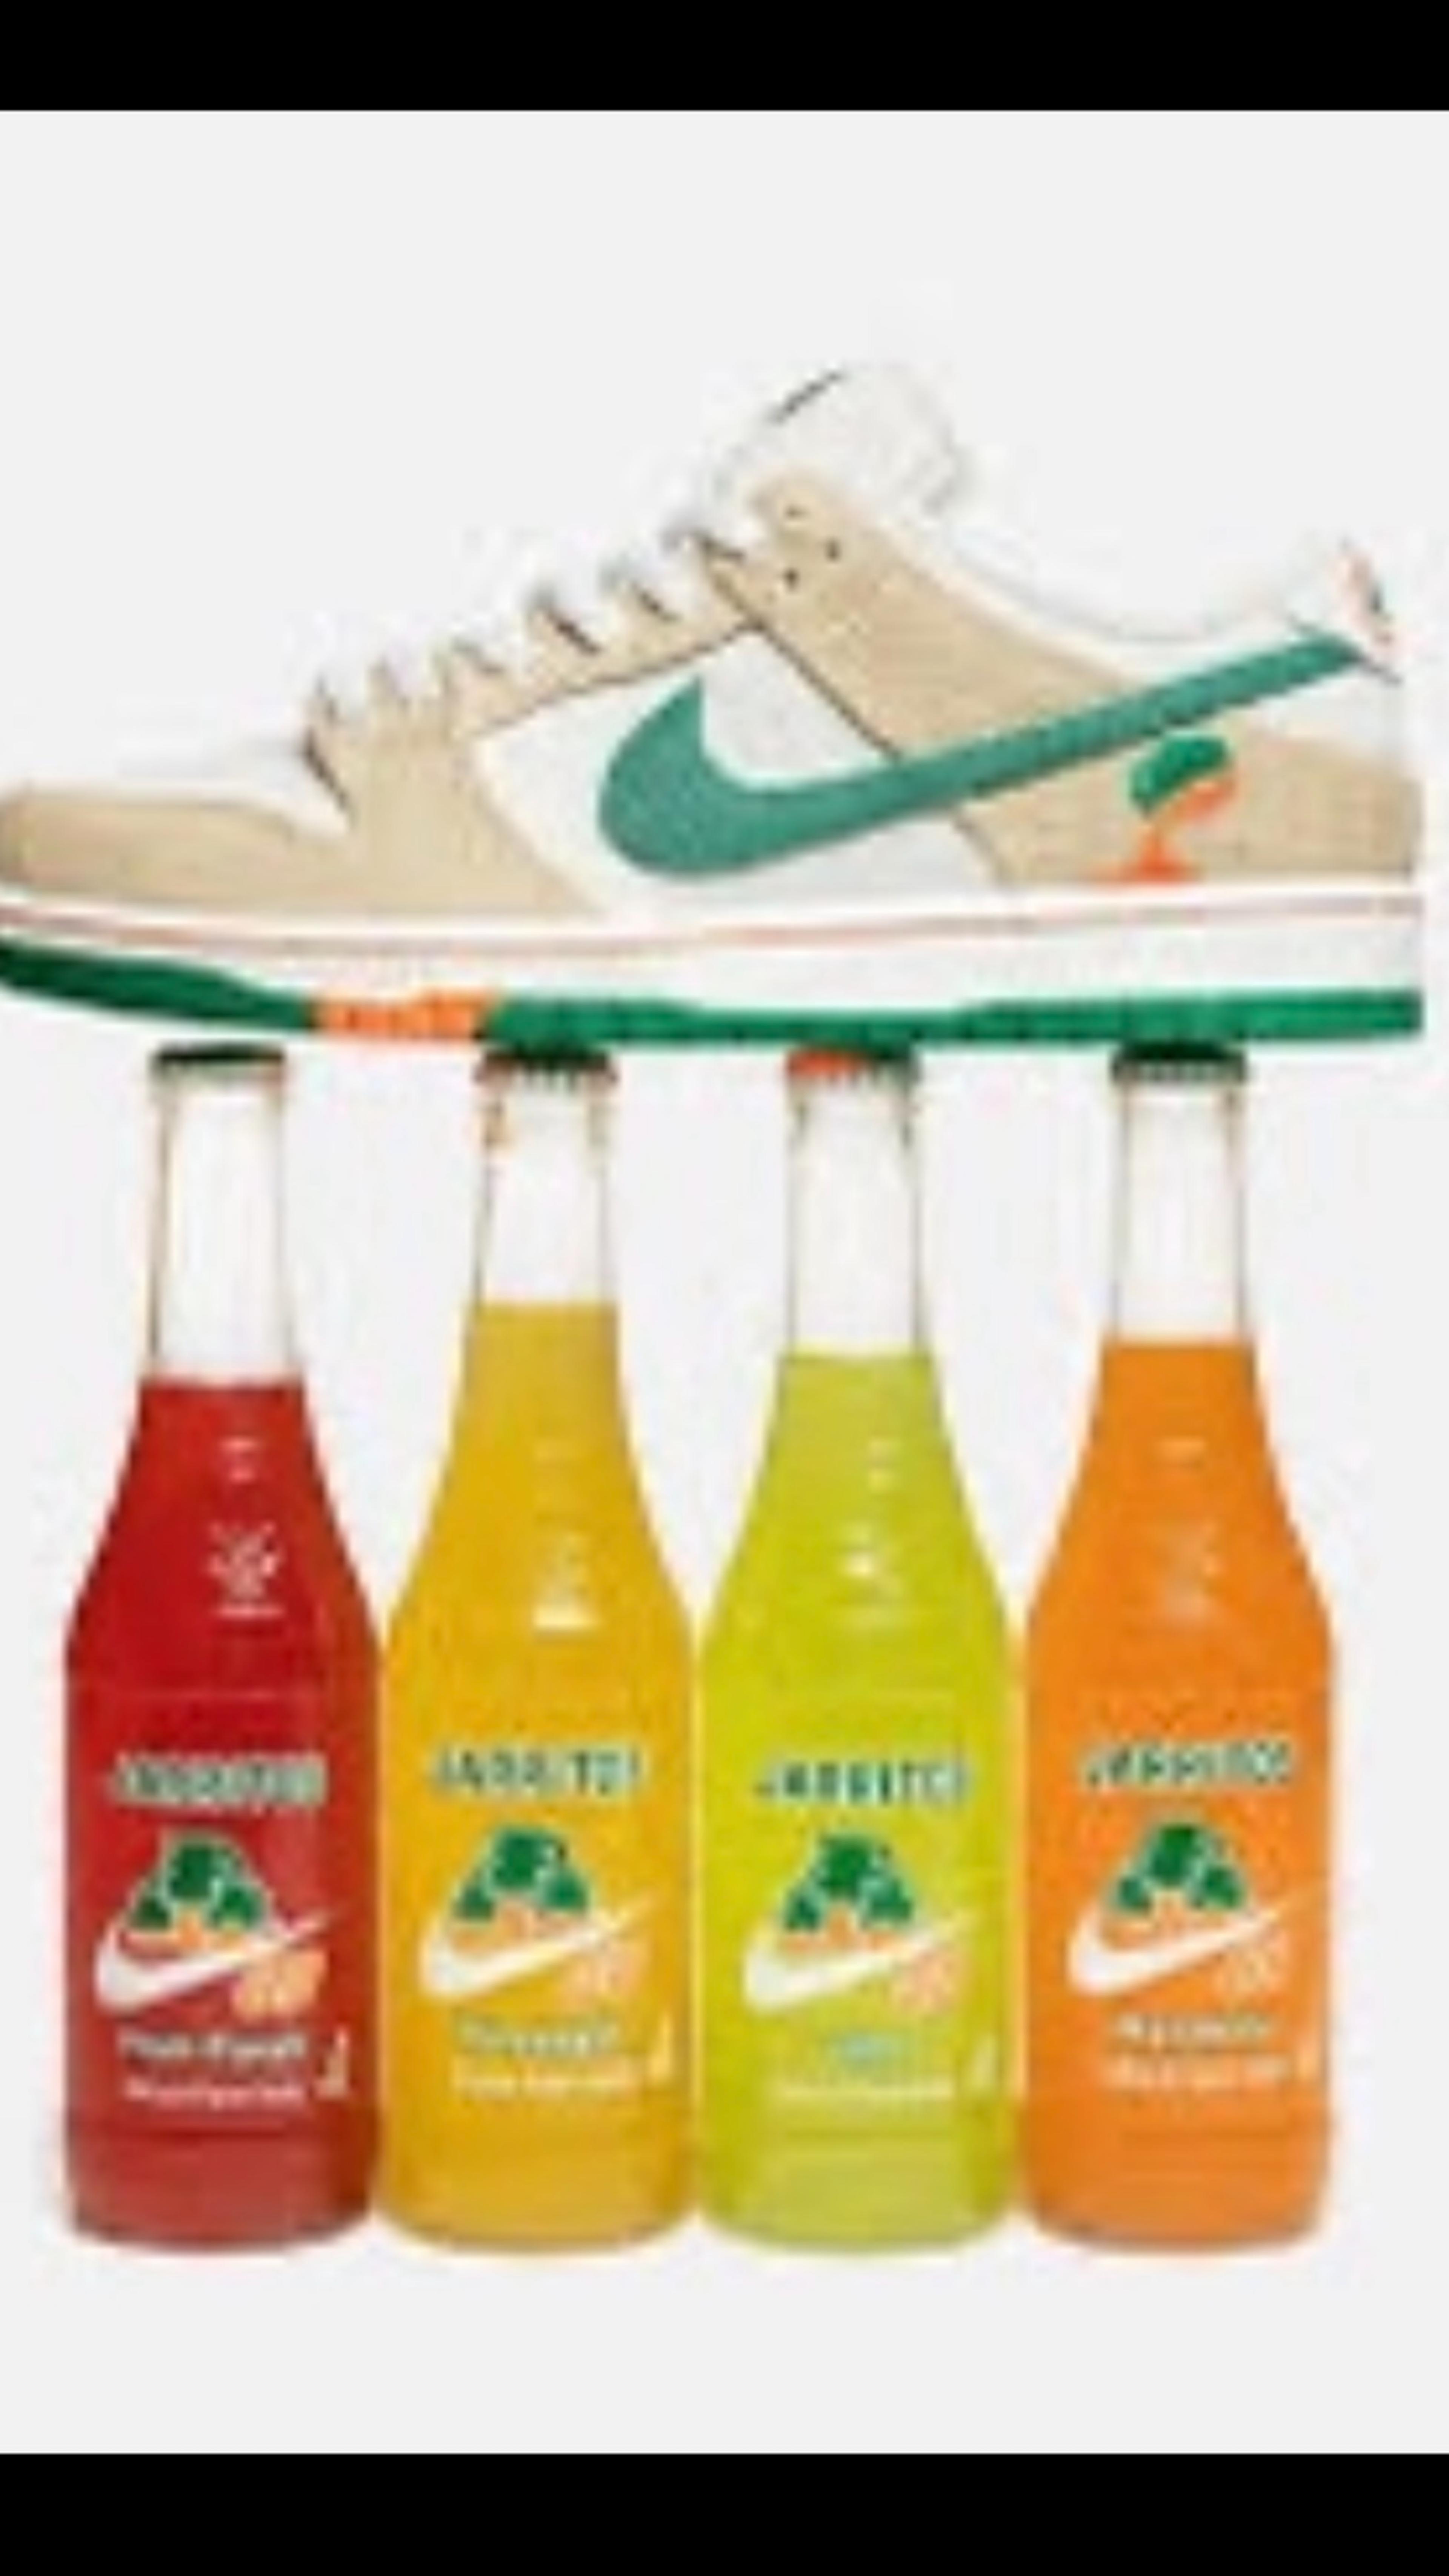 Preview image for the show titled "Mys Whl J4 SB PINE GREEN OR JARRITOS up to 11 & 2 SHOES & INSTAS" at Today @ 12:10 AM